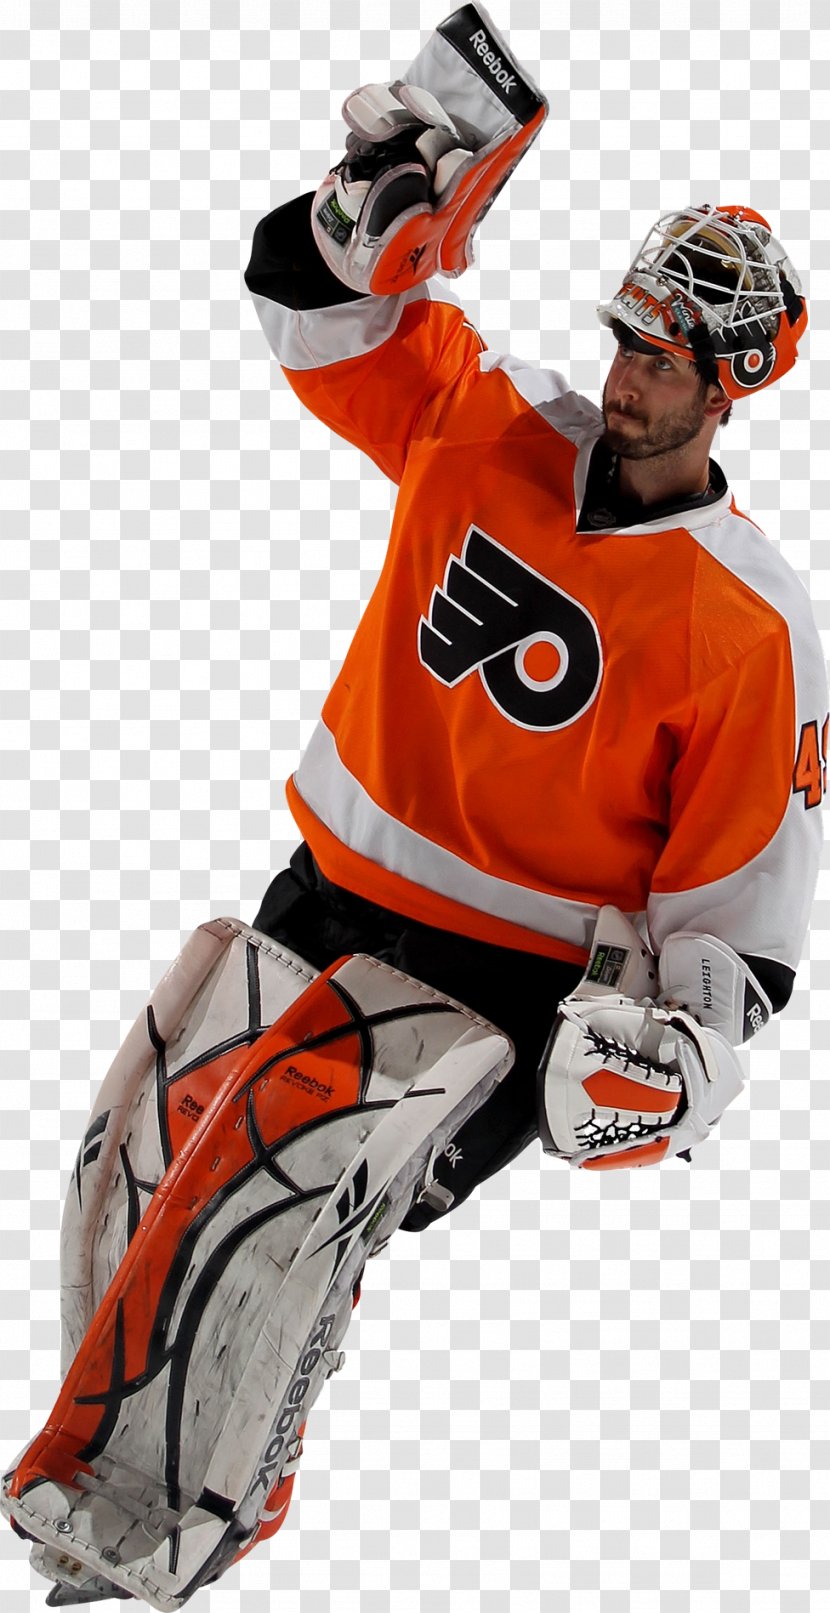 Protective Gear In Sports Personal Equipment Team Sport Hockey Pants & Ski Shorts - Philadelphia Flyers Transparent PNG